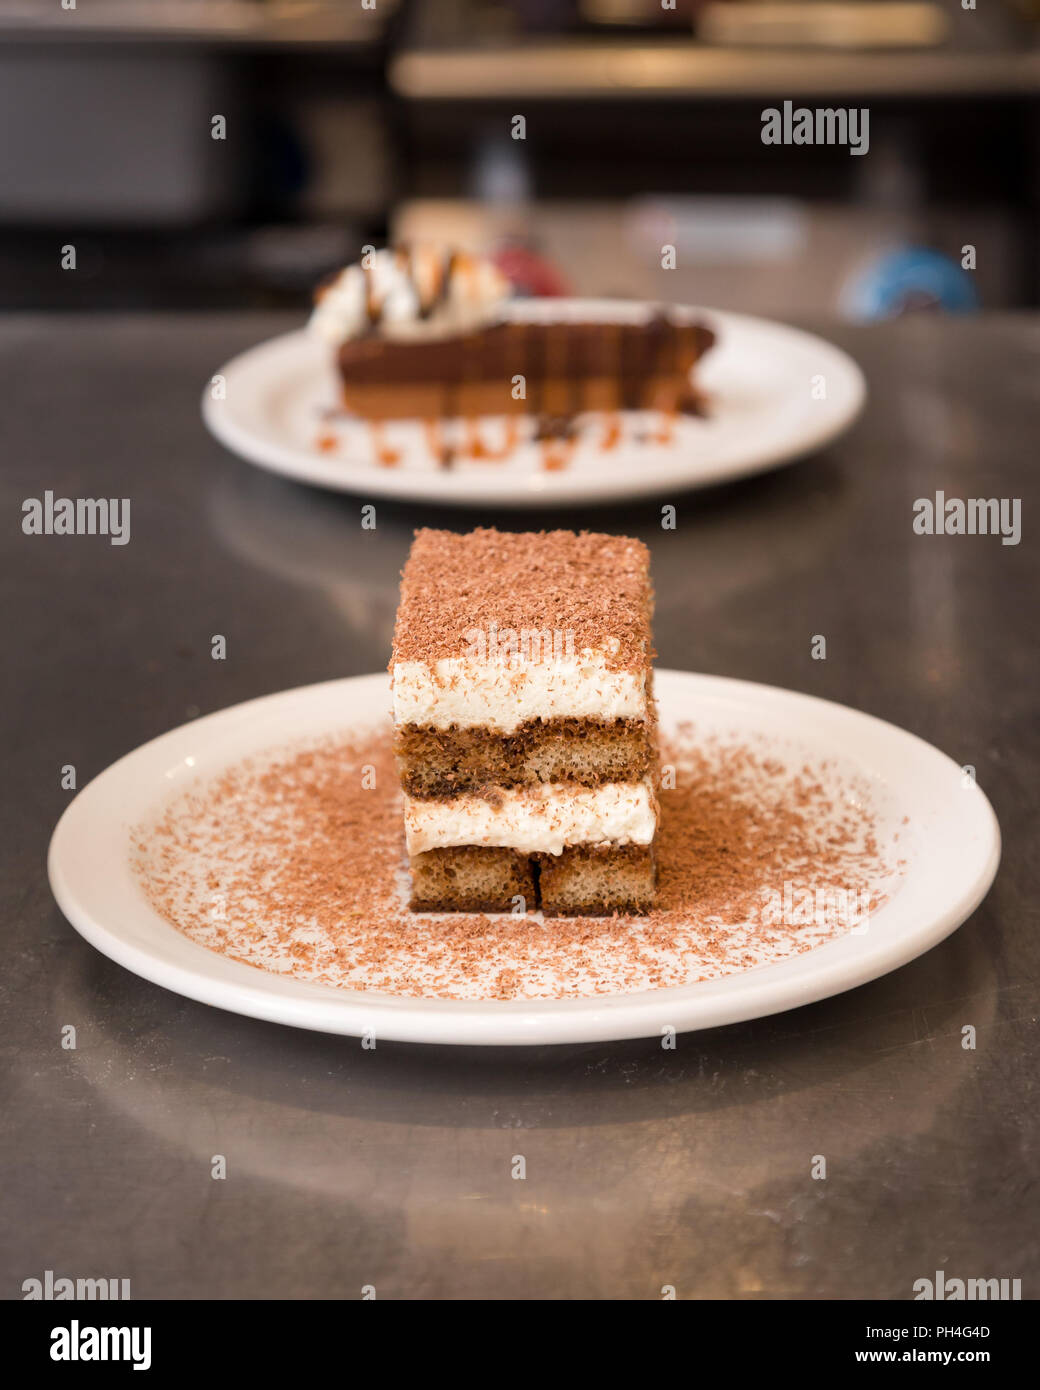 Tiramisu dusted with chocolate with a chocolate tart in the background. Stock Photo